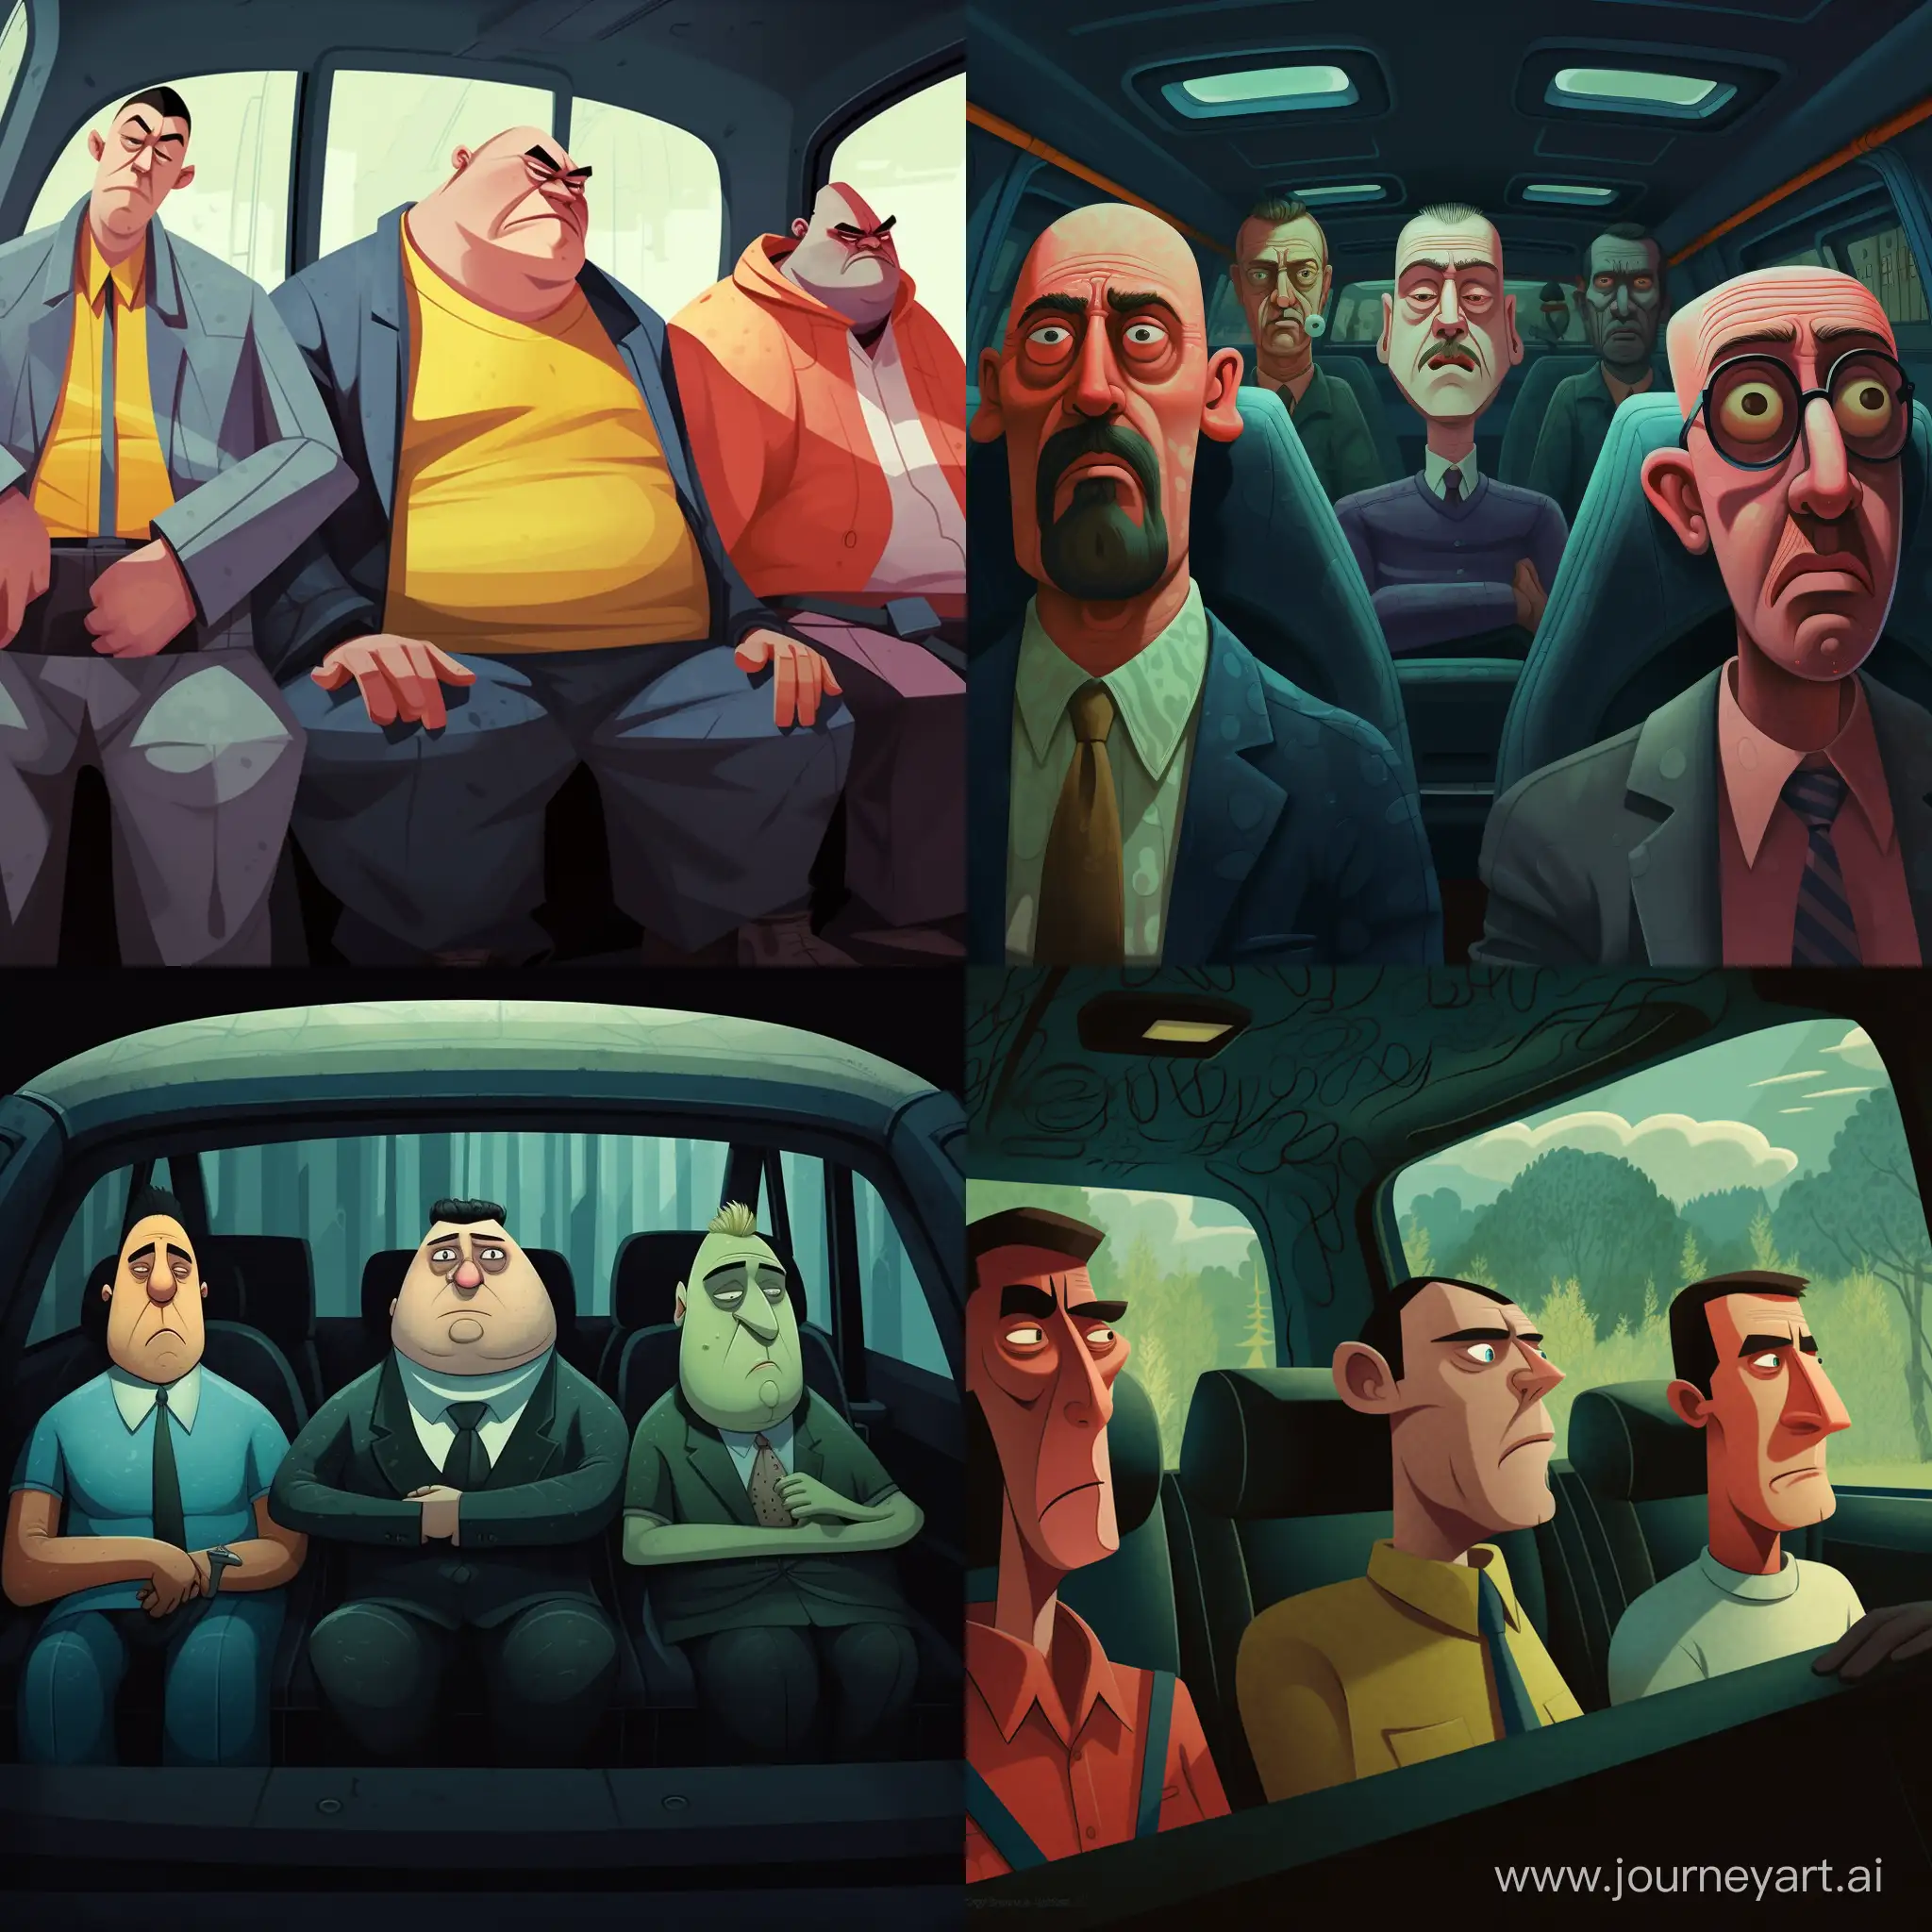 A few animated men who barely fit in a car